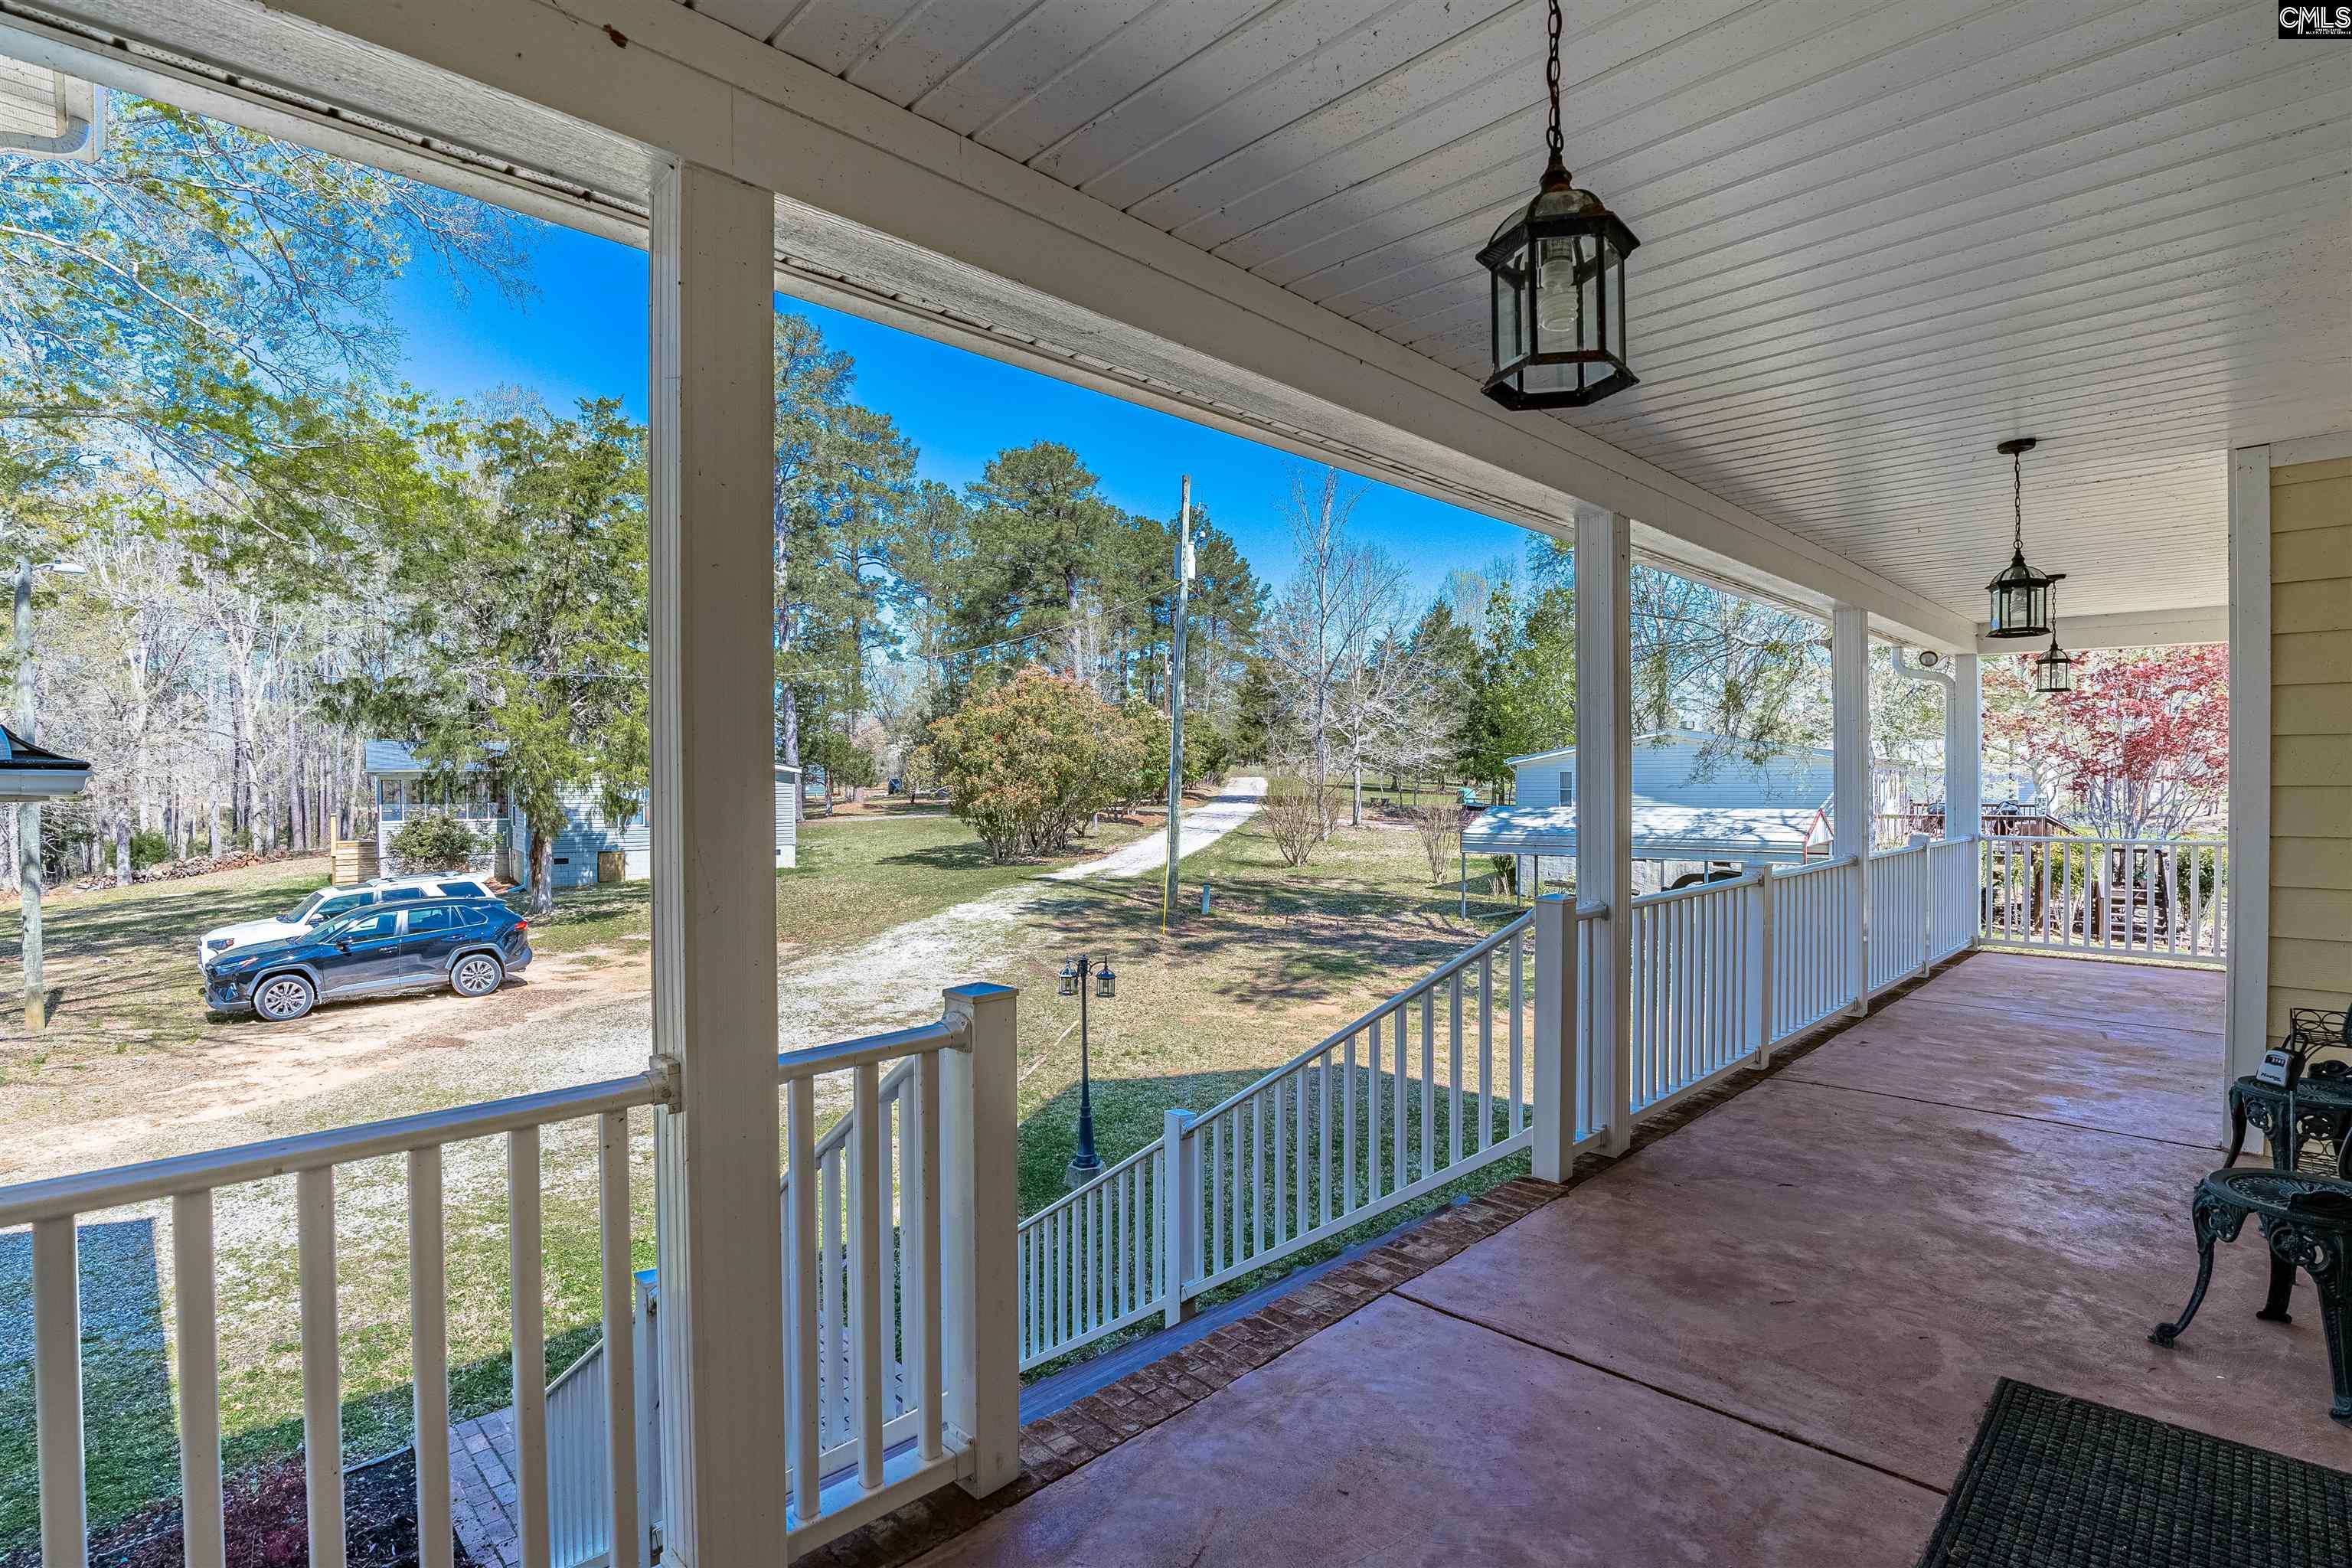 71 Century Drive, Ridgeway, South Carolina, 29130, United States, 5 Bedrooms Bedrooms, ,6 BathroomsBathrooms,Residential,For Sale,71 Century Drive,1500660